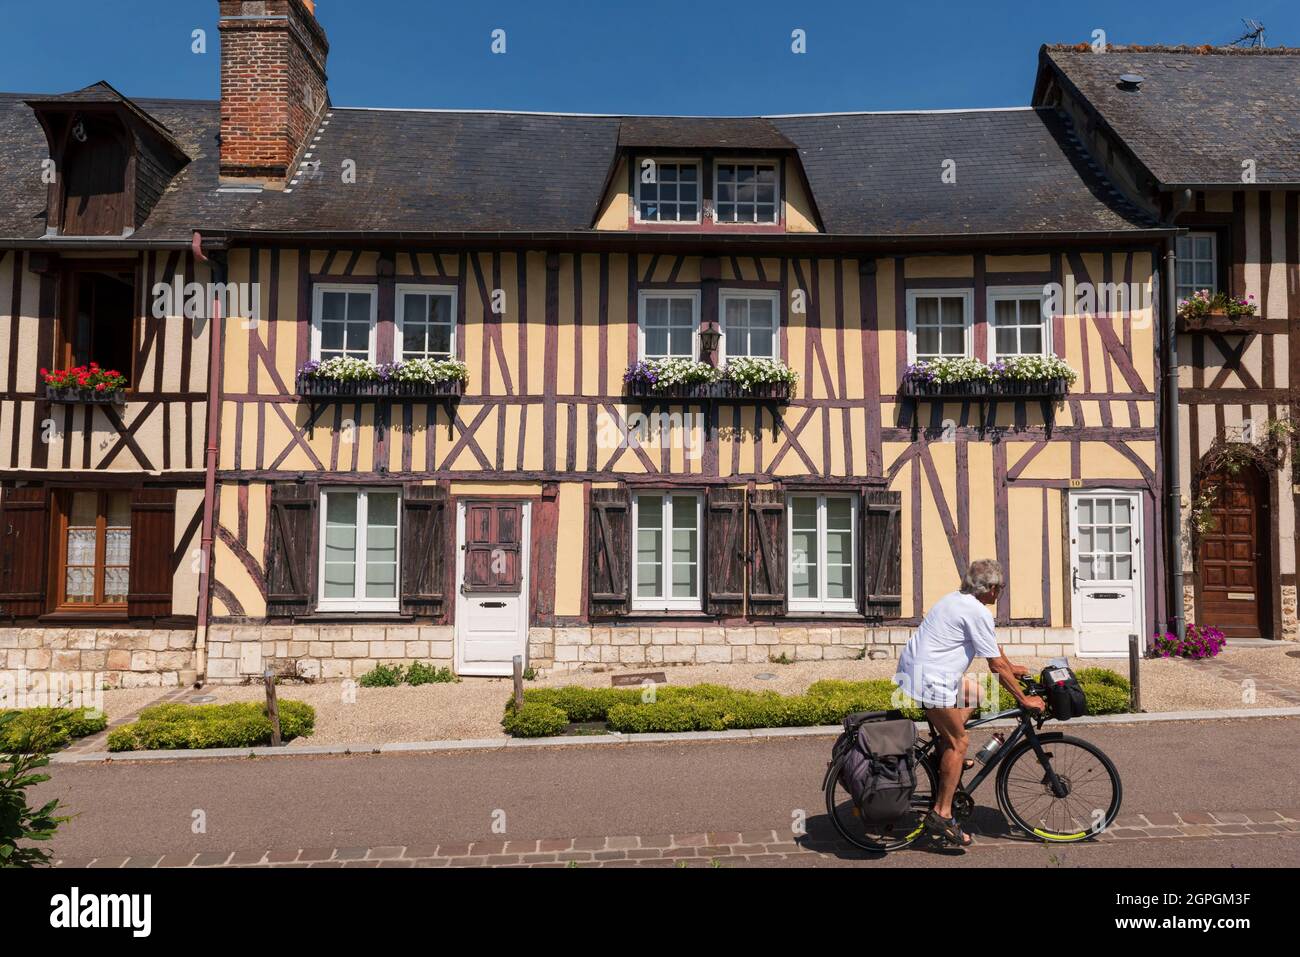 France, Eure, Le Bec Hellouin, labelled Les Plus Beaux Villages de France (The Most Beautiful Villages of France), normand timbered house Stock Photo